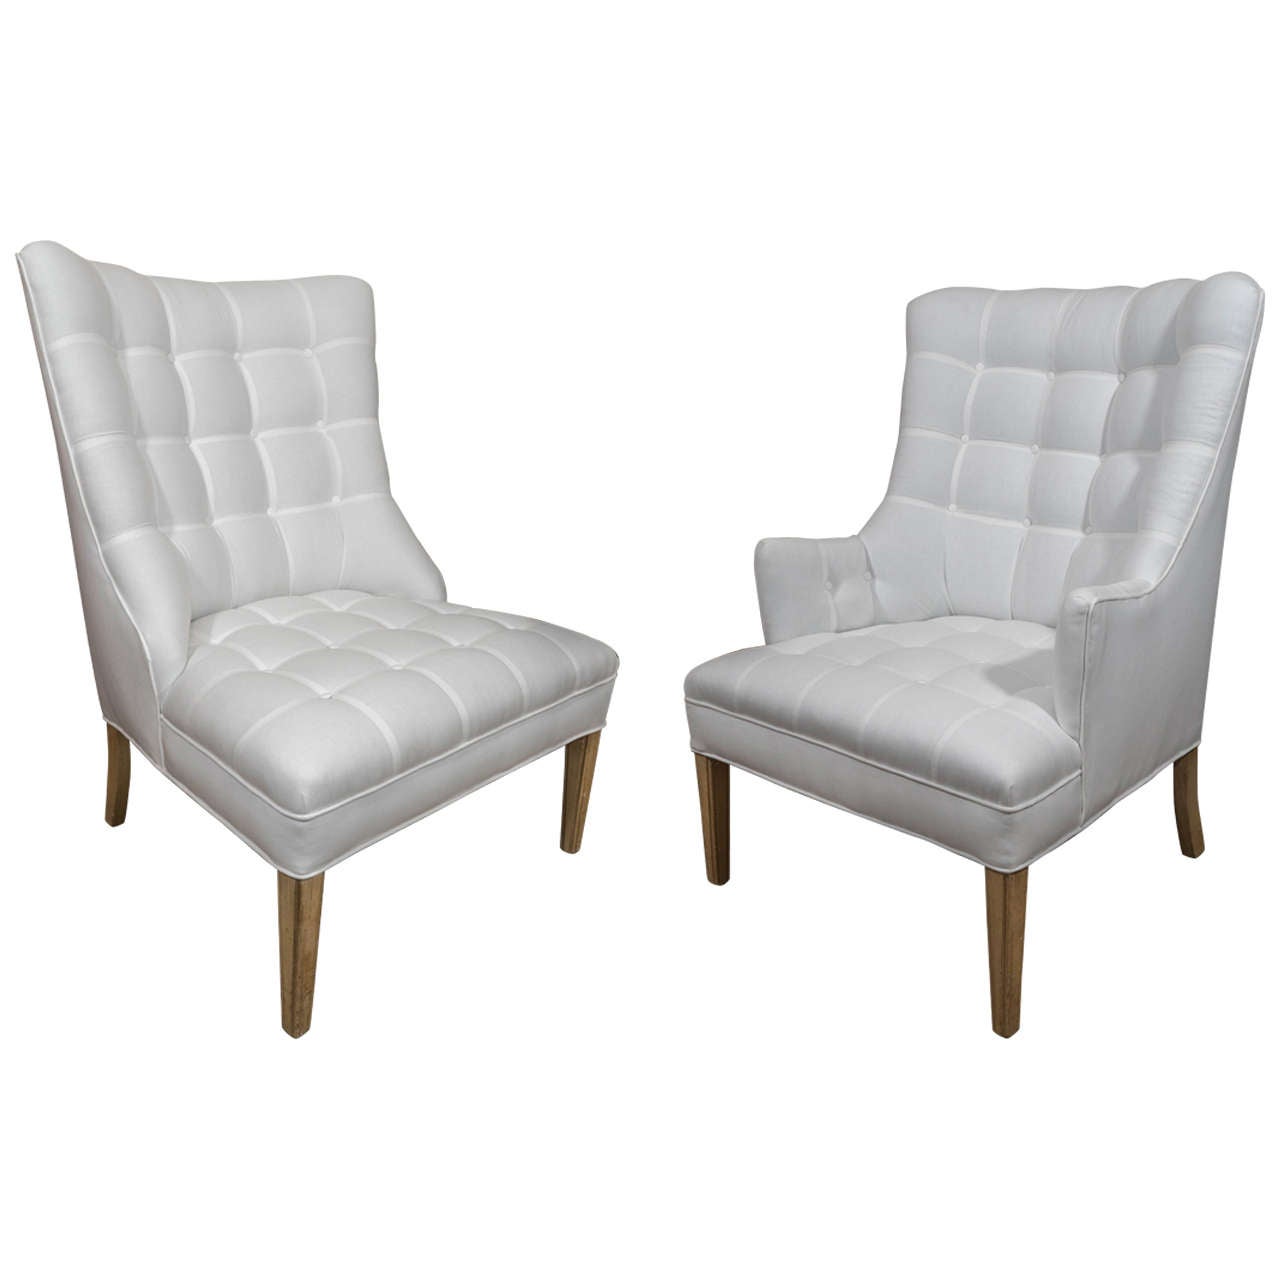 Pair of Upholstered "His and Her" Chairs